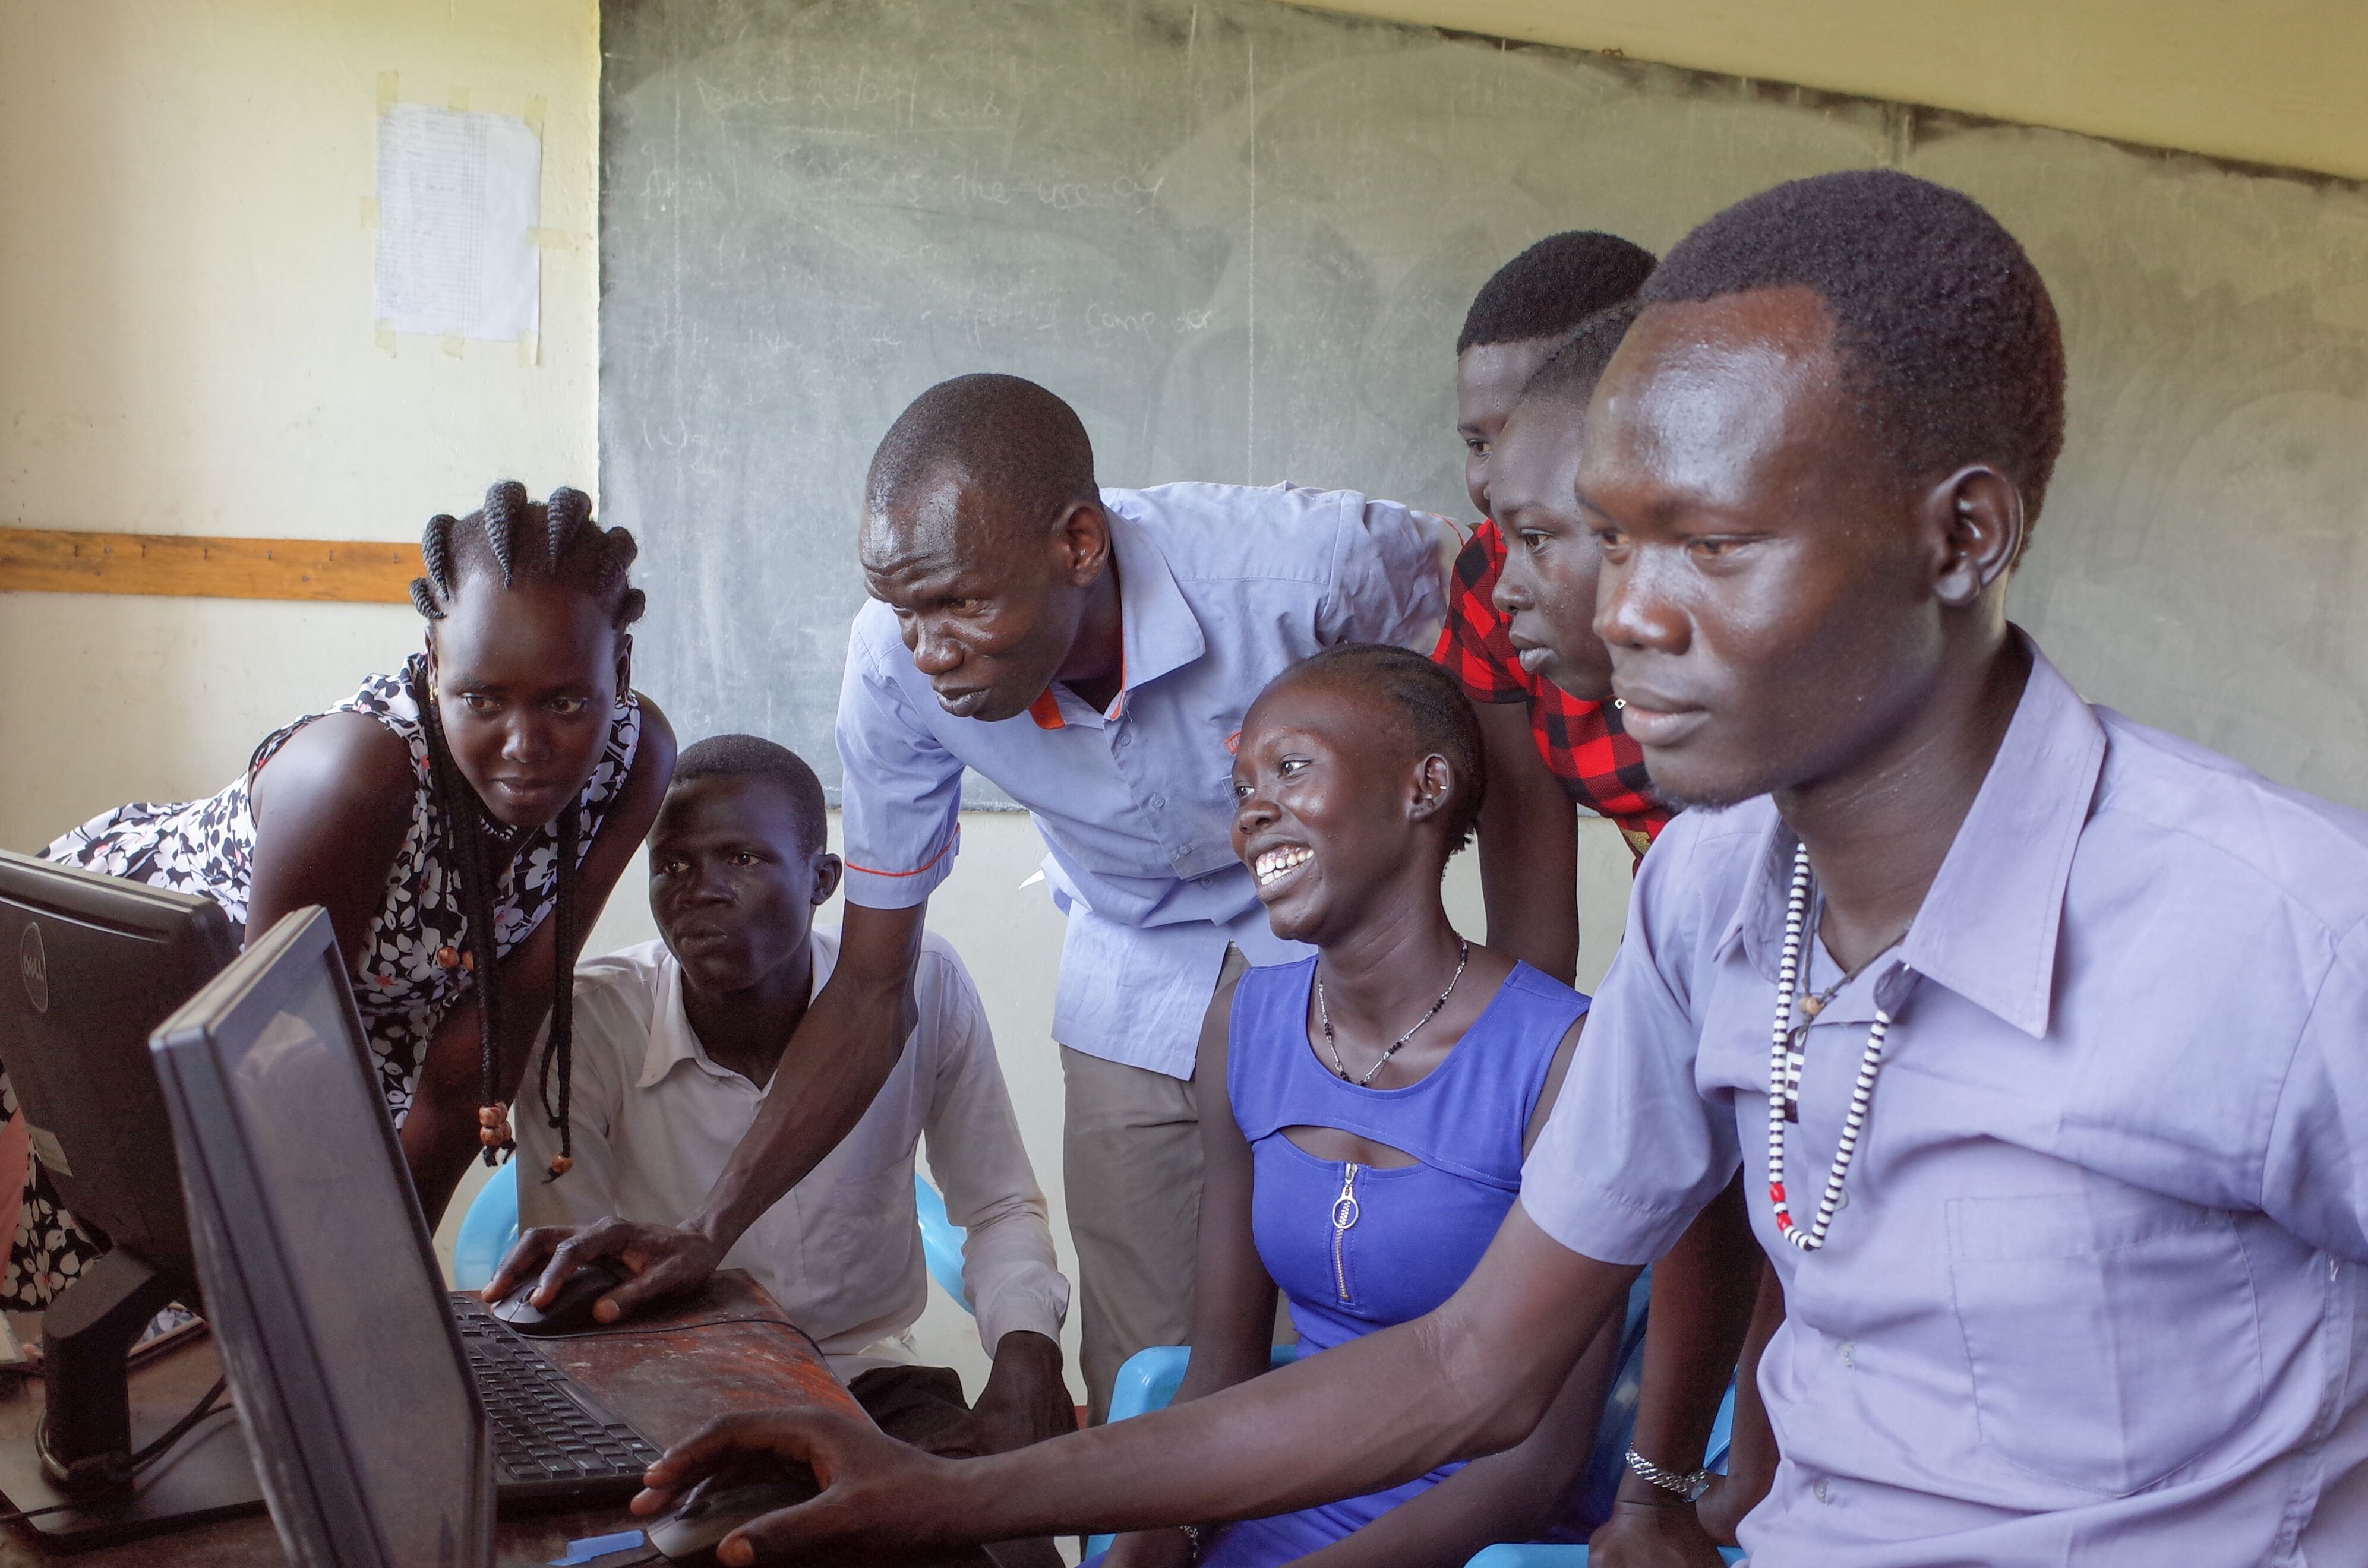 Young people in Uganda take courses through Education for Humanity